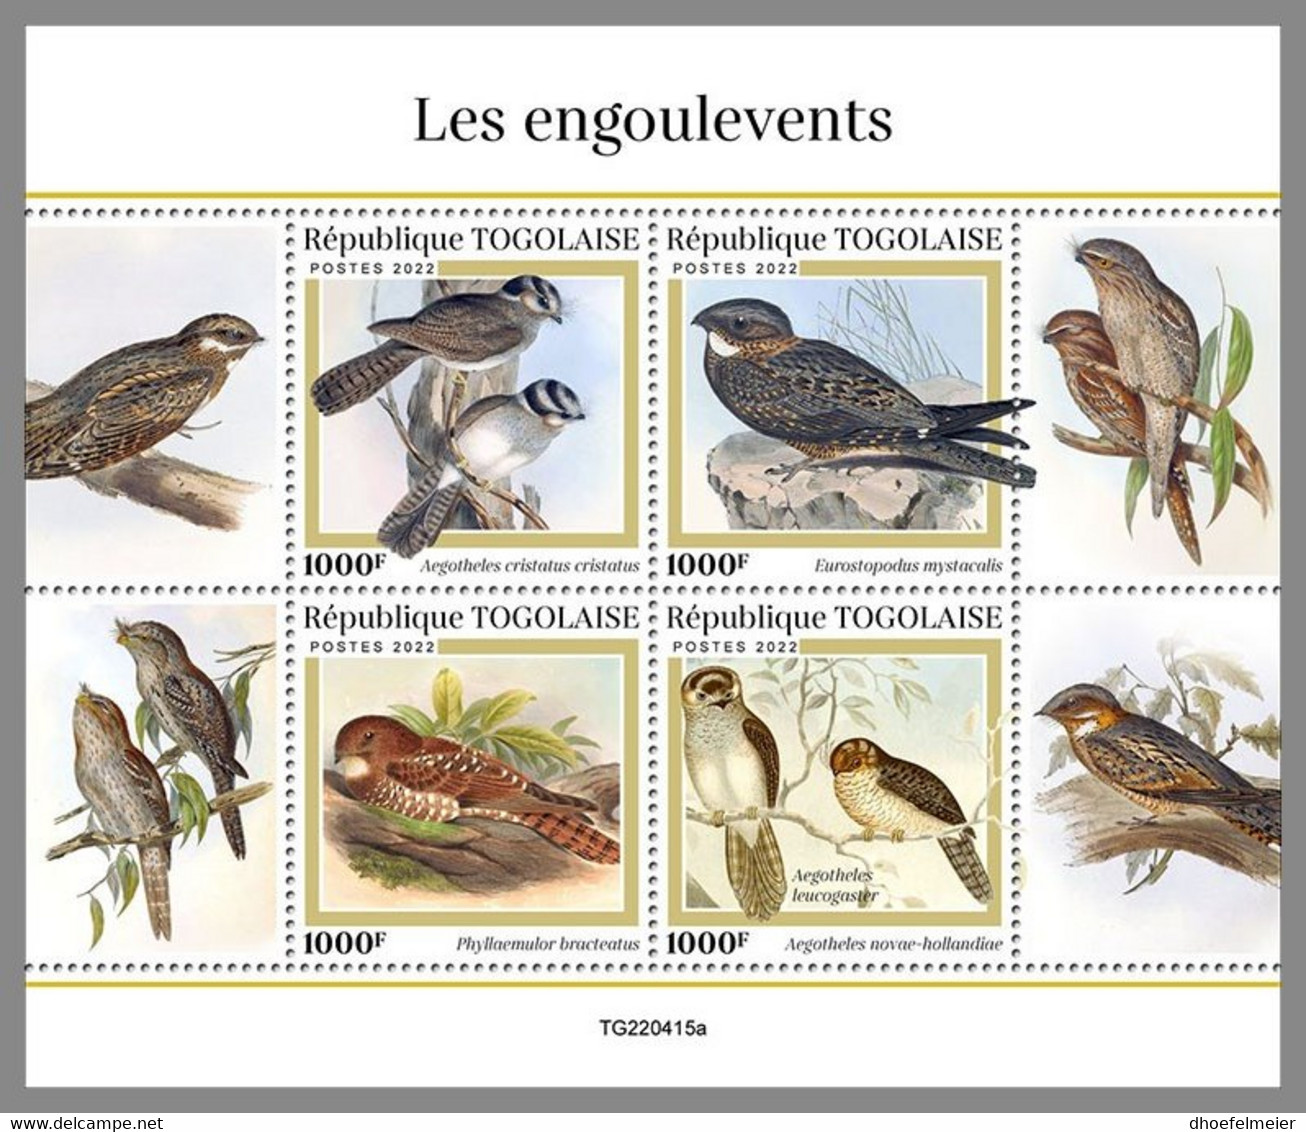 TOGO 2022 MNH Nightjars Nachtschwalben Engoulevents M/S - OFFICIAL ISSUE - DHQ2310 - Swallows